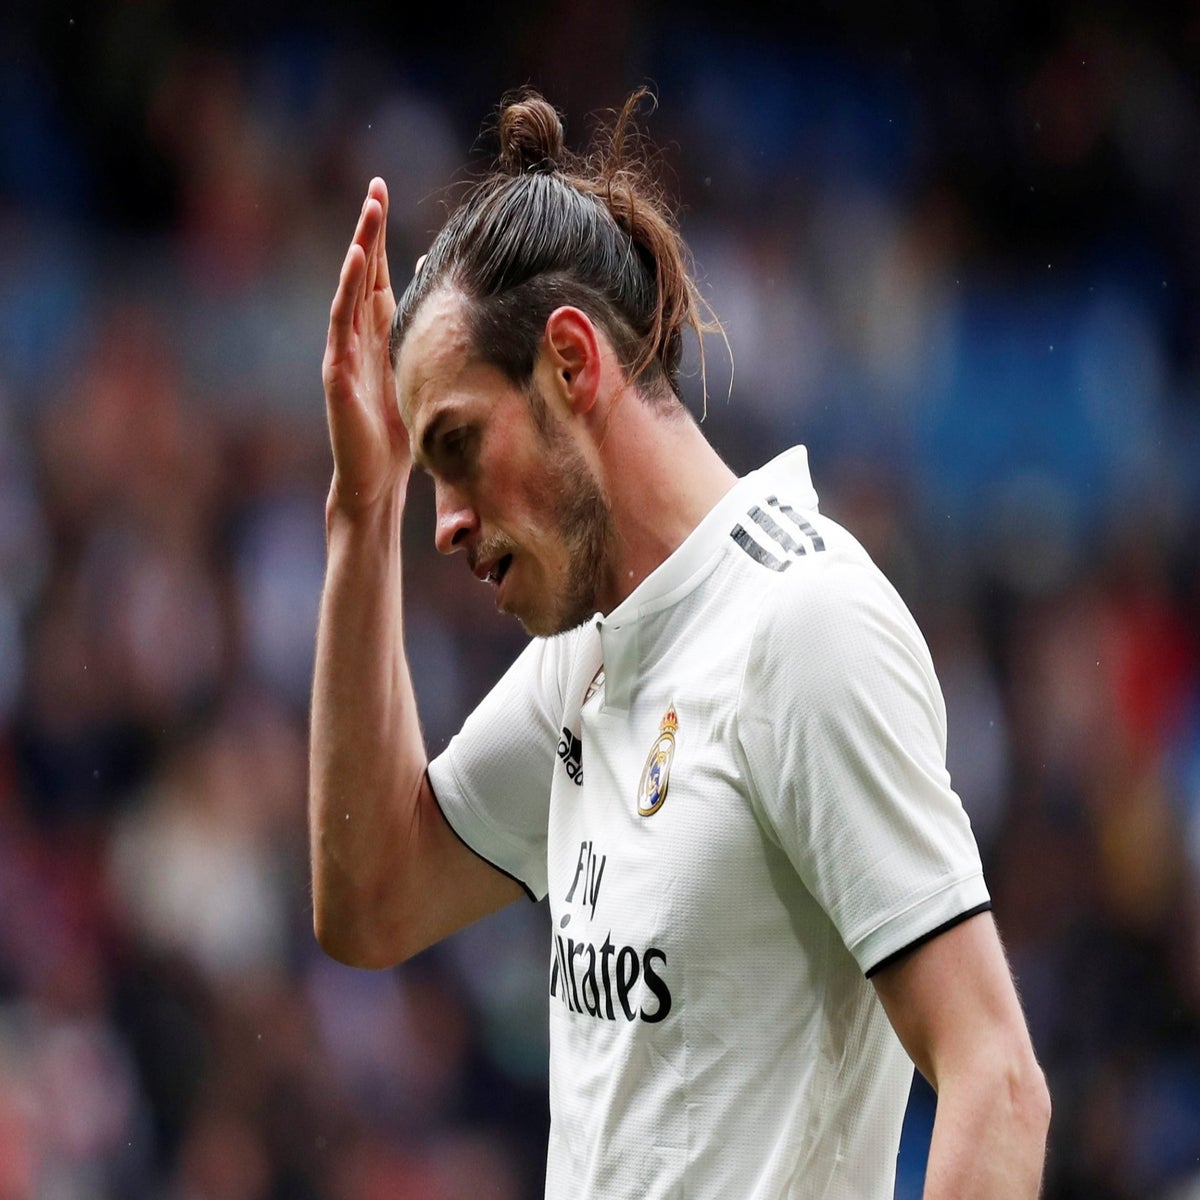 When Gareth Bale was unplayable: remembering his golden 2012/13 at Tottenham